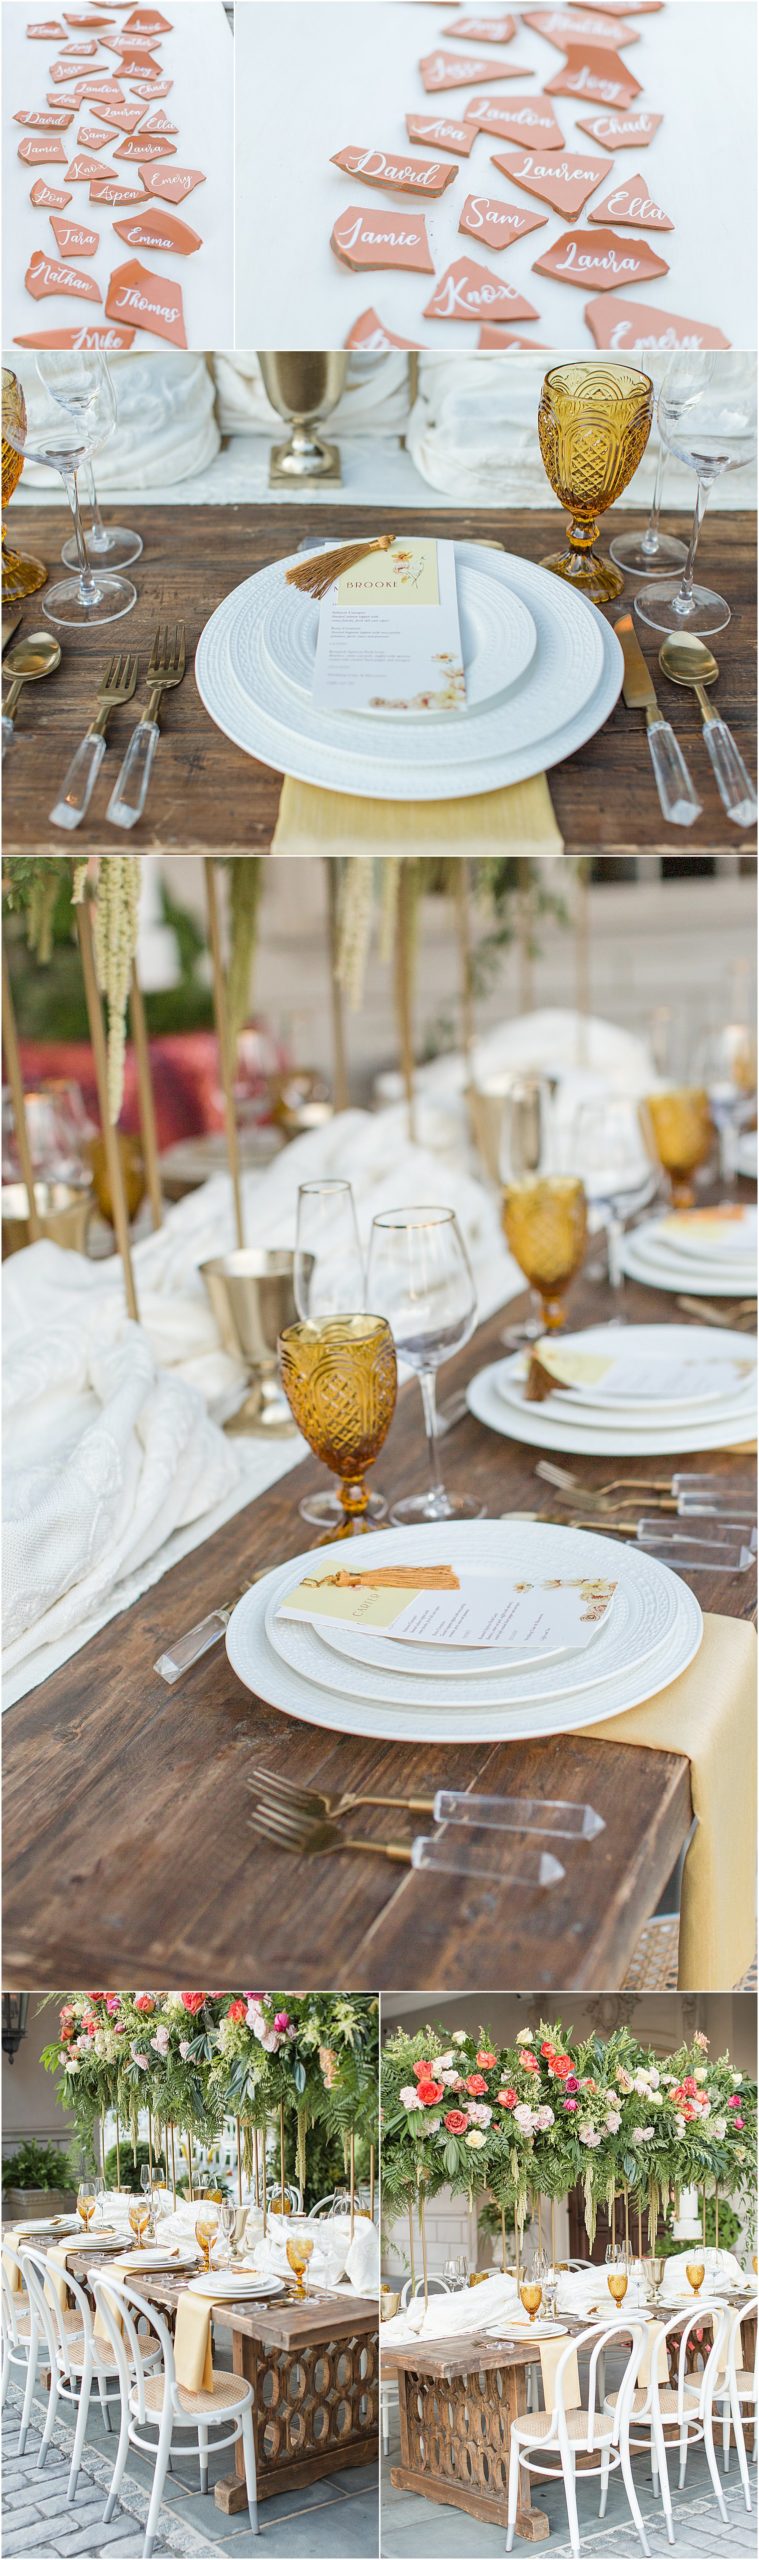 Table setting and other details at outdoor wedding